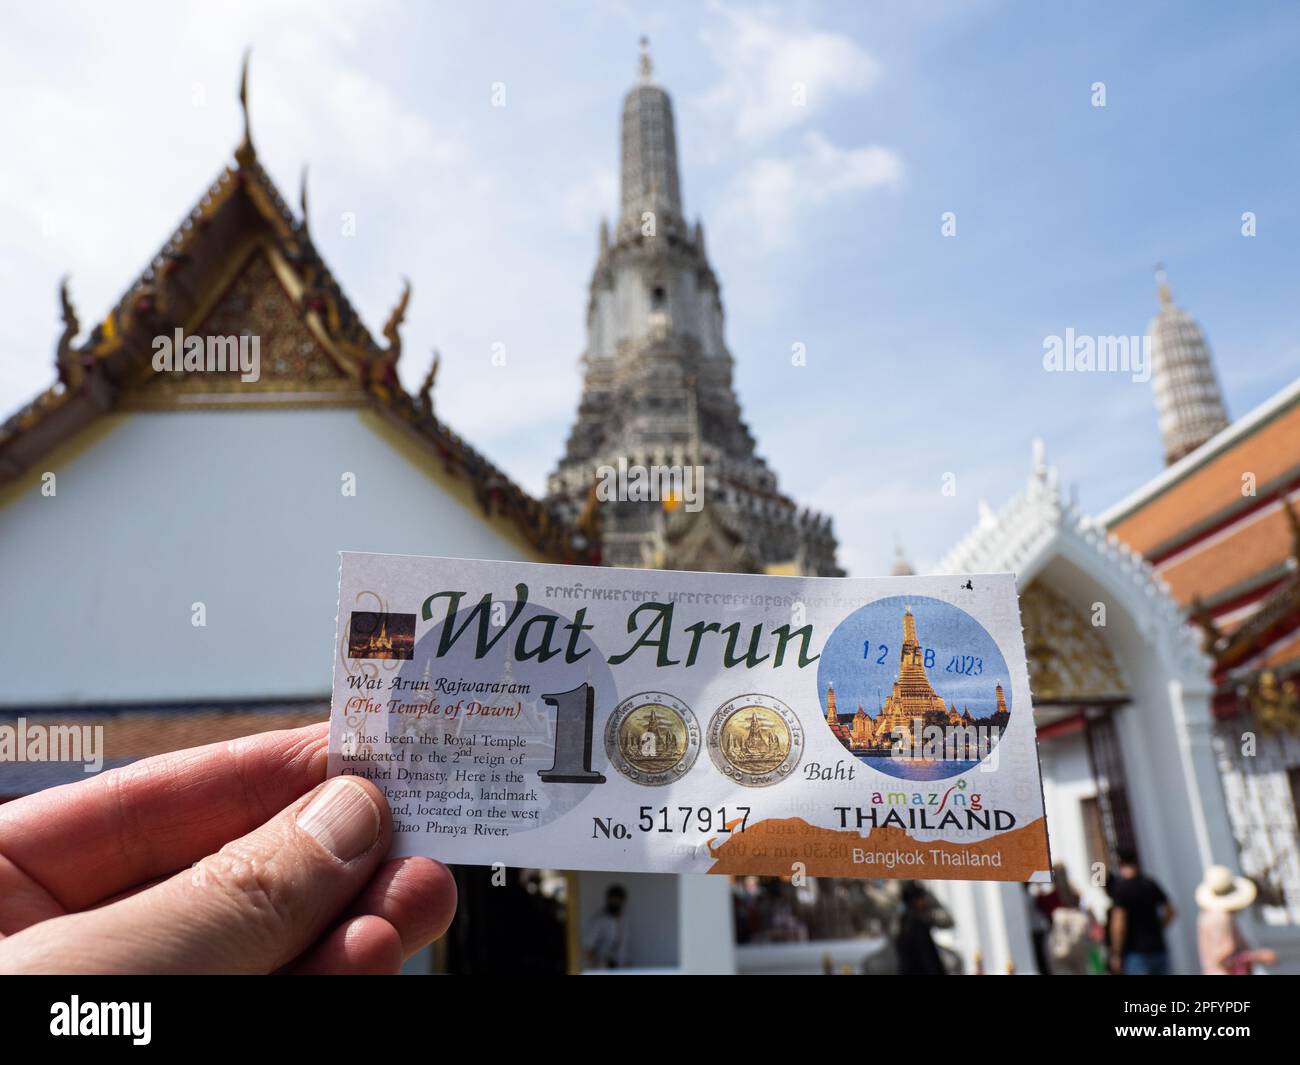 This is a Hundred Baht entrance ticket to Wat Arun Temple in Bangkok, Thailand, featuring the temple's iconic spires in the background. Wat Arun is a Stock Photo